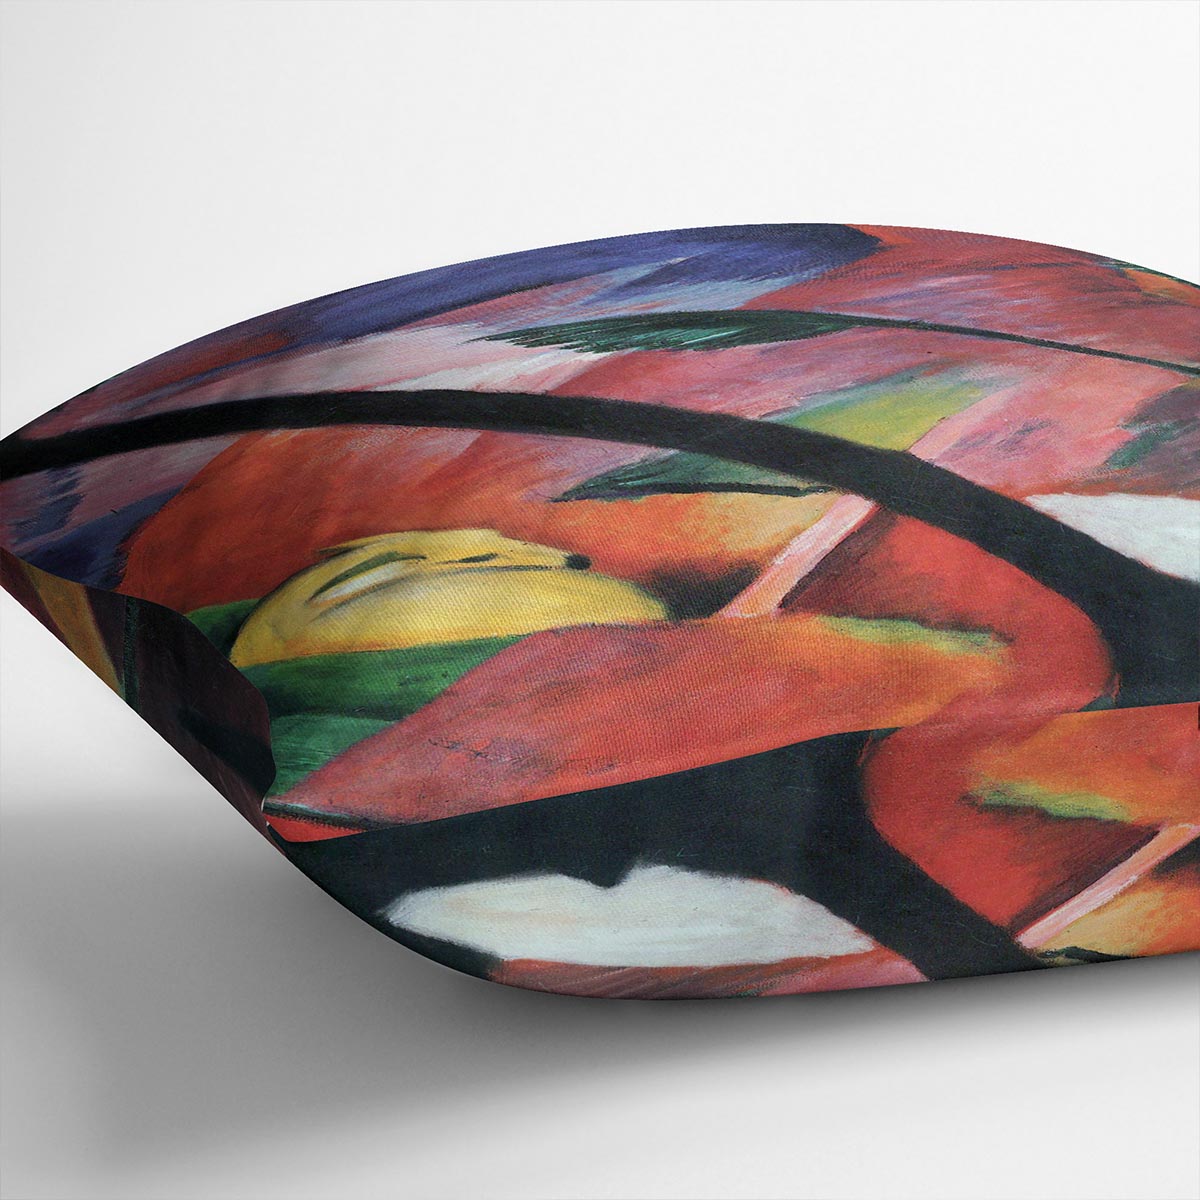 Deer in the forest II by Franz Marc Cushion